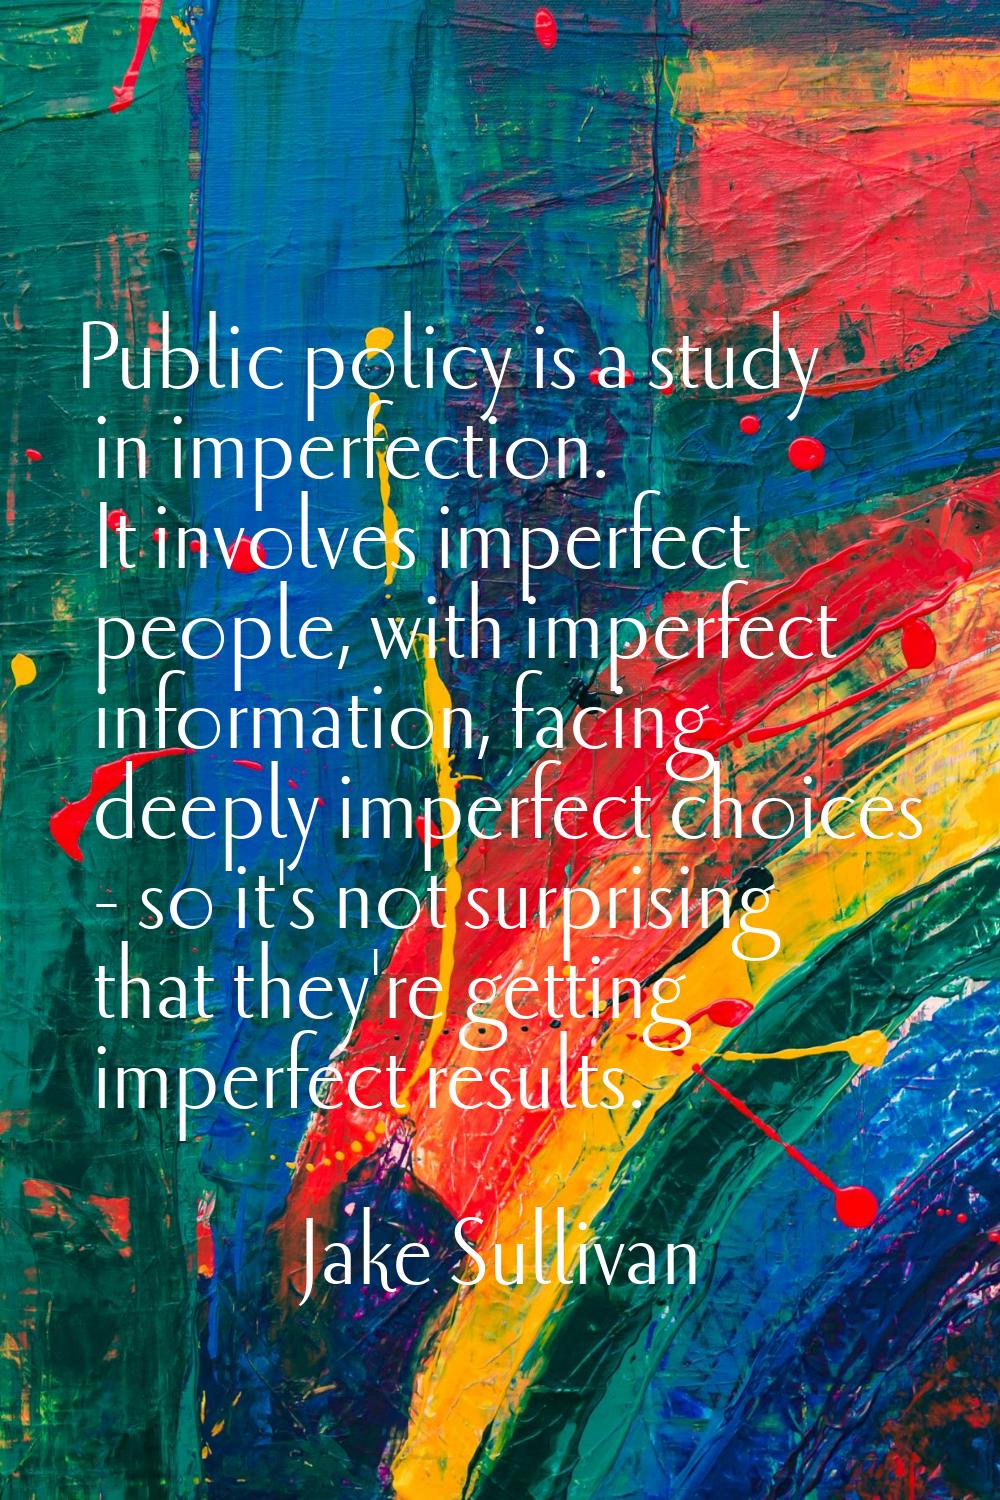 Public policy is a study in imperfection. It involves imperfect people, with imperfect information,